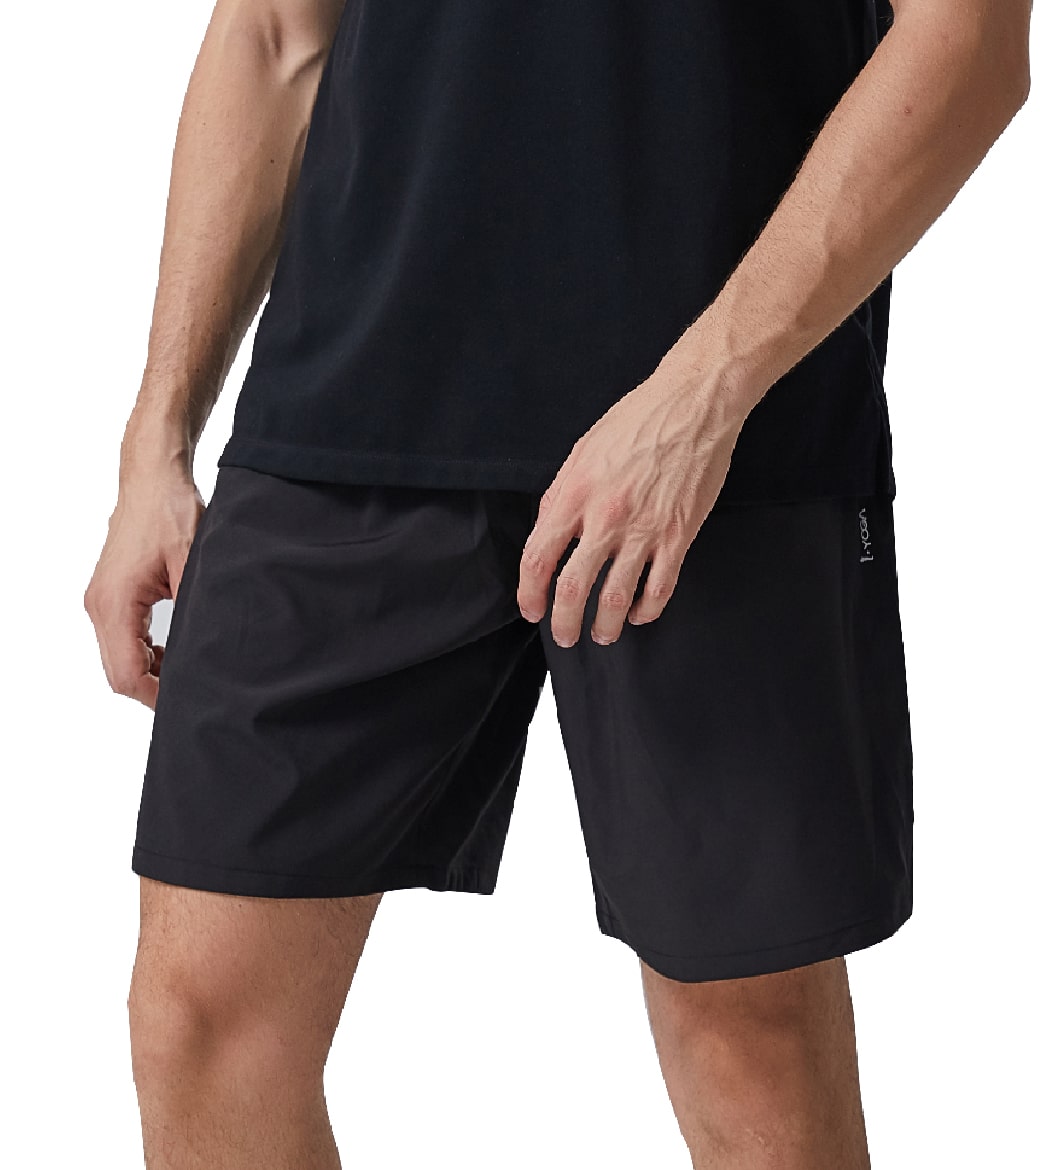 LOVESOFT Men's Quick-Dry Loose Casual & Running Active Shorts